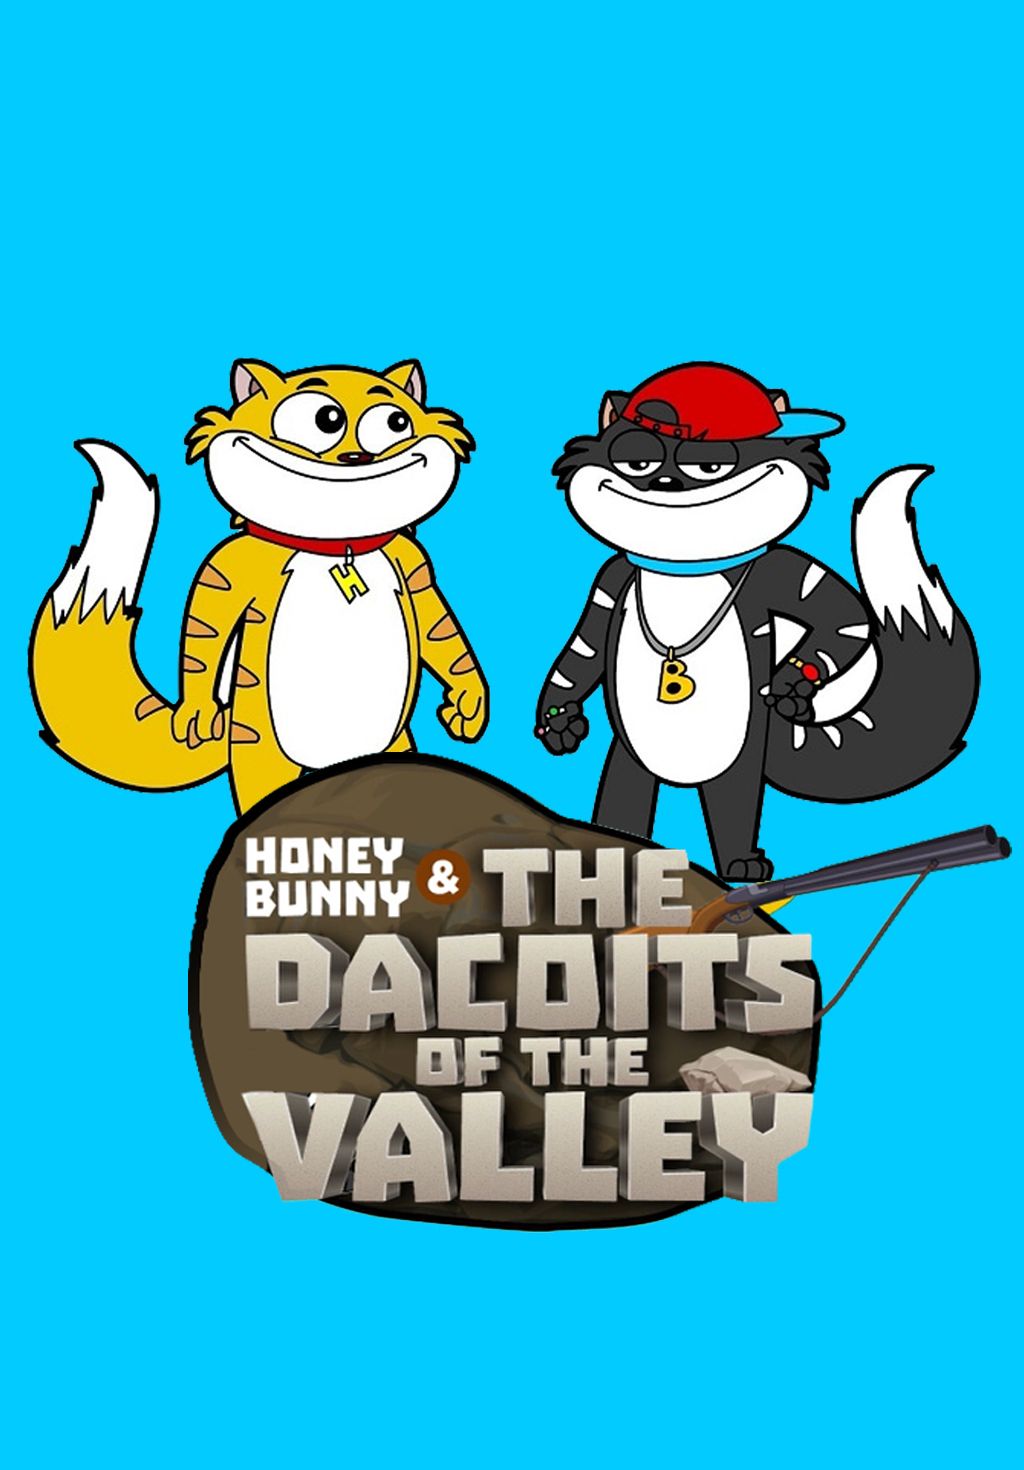 Honey Bunny and The Dacoits of the Valley - Bangla